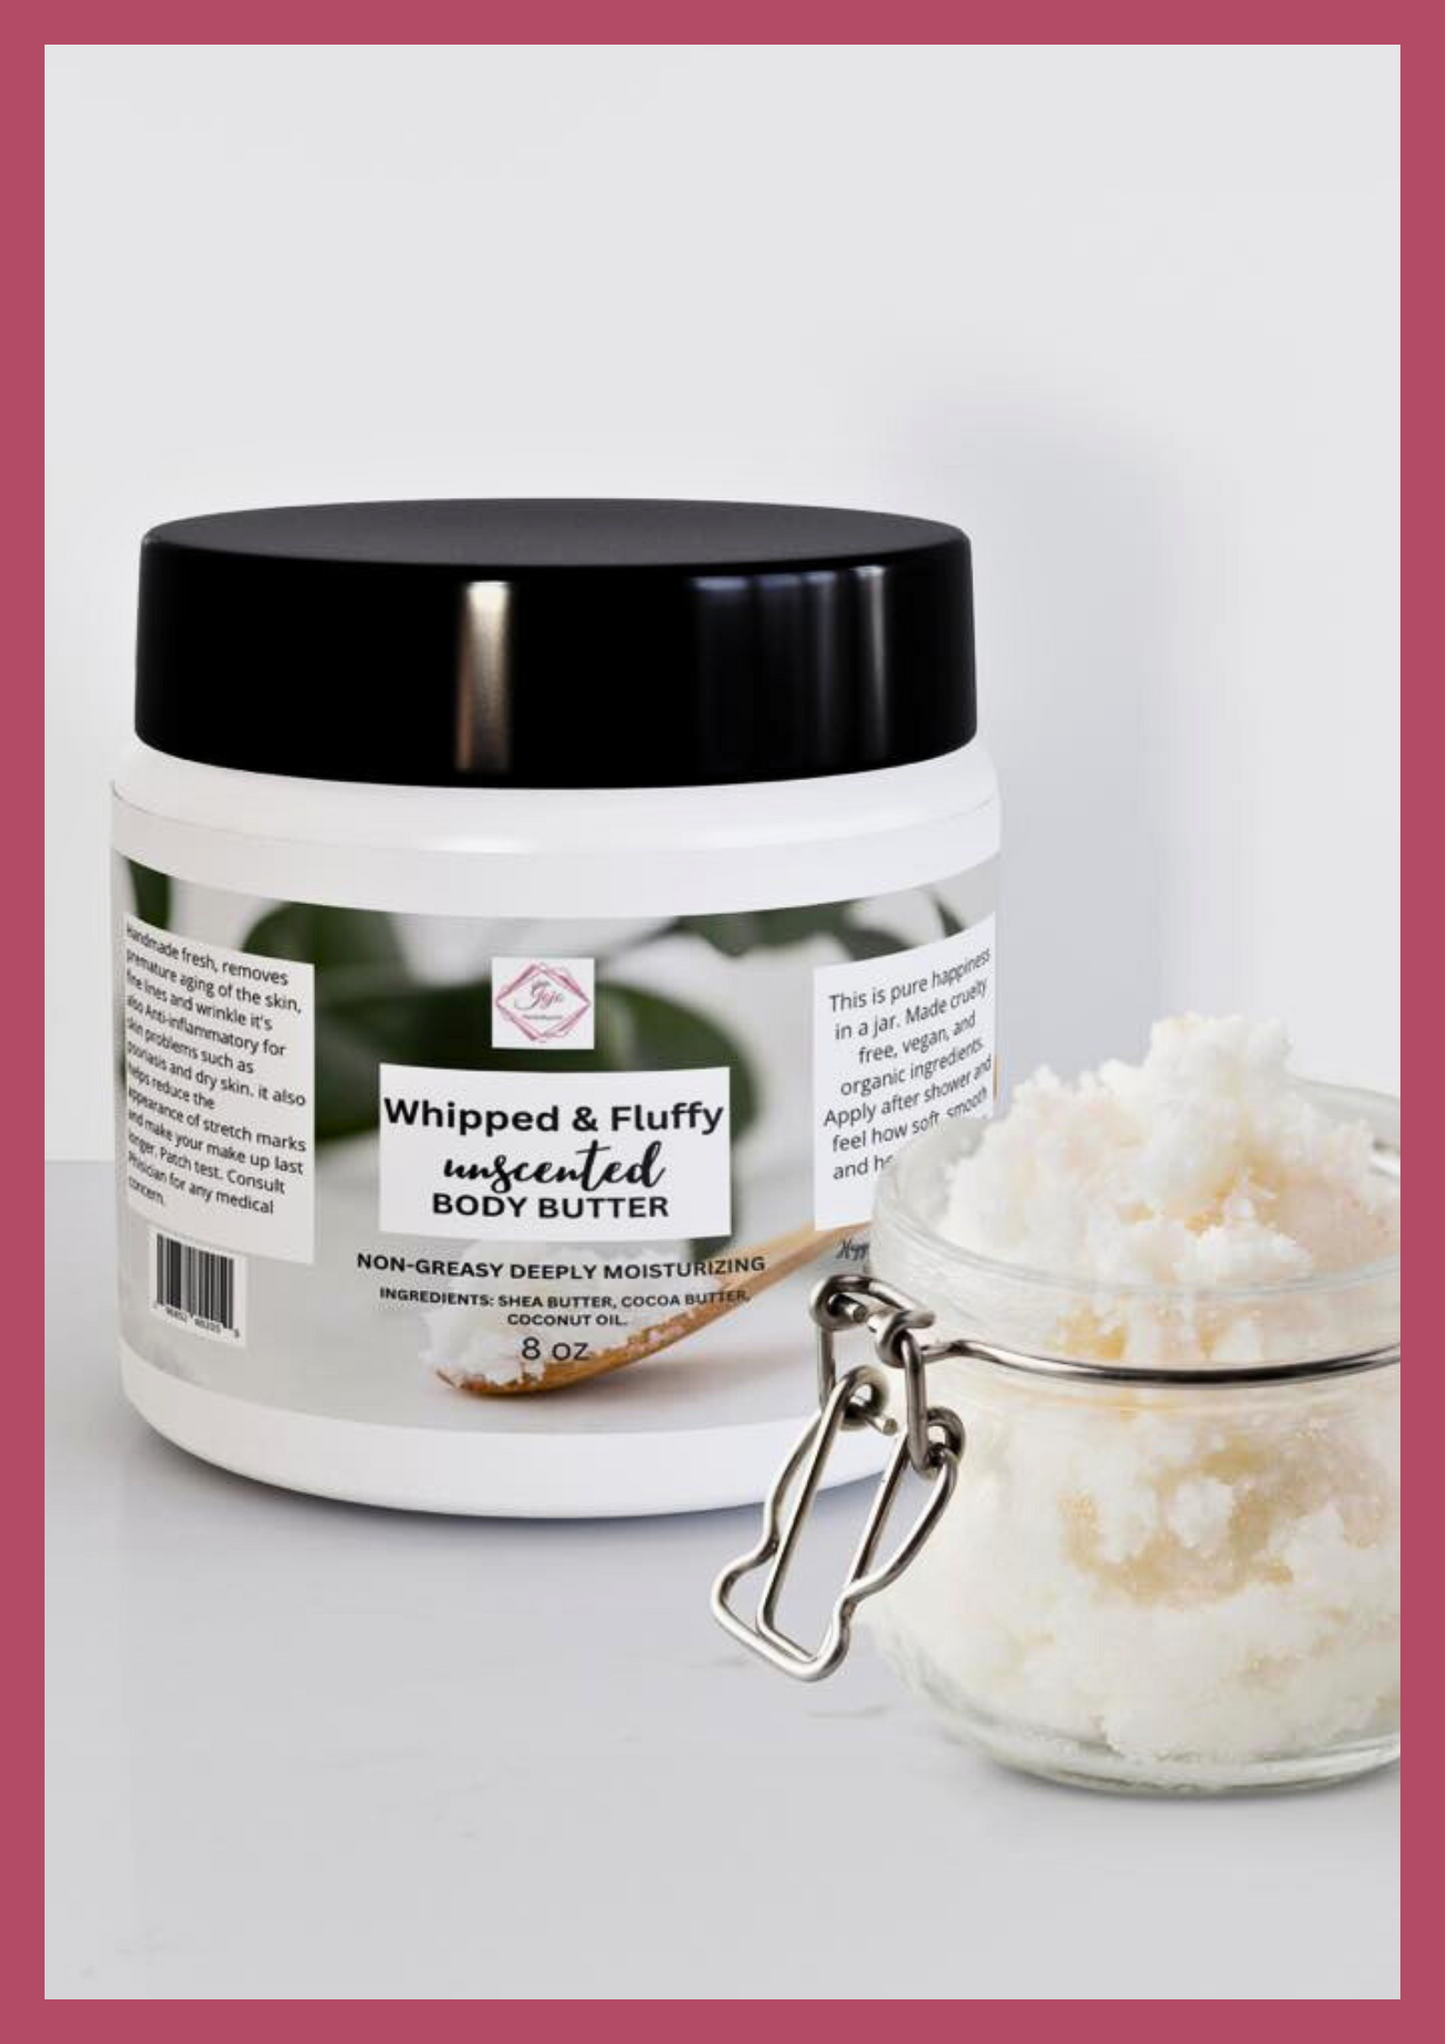 Whipped and Fluffy Unscented Body Butter